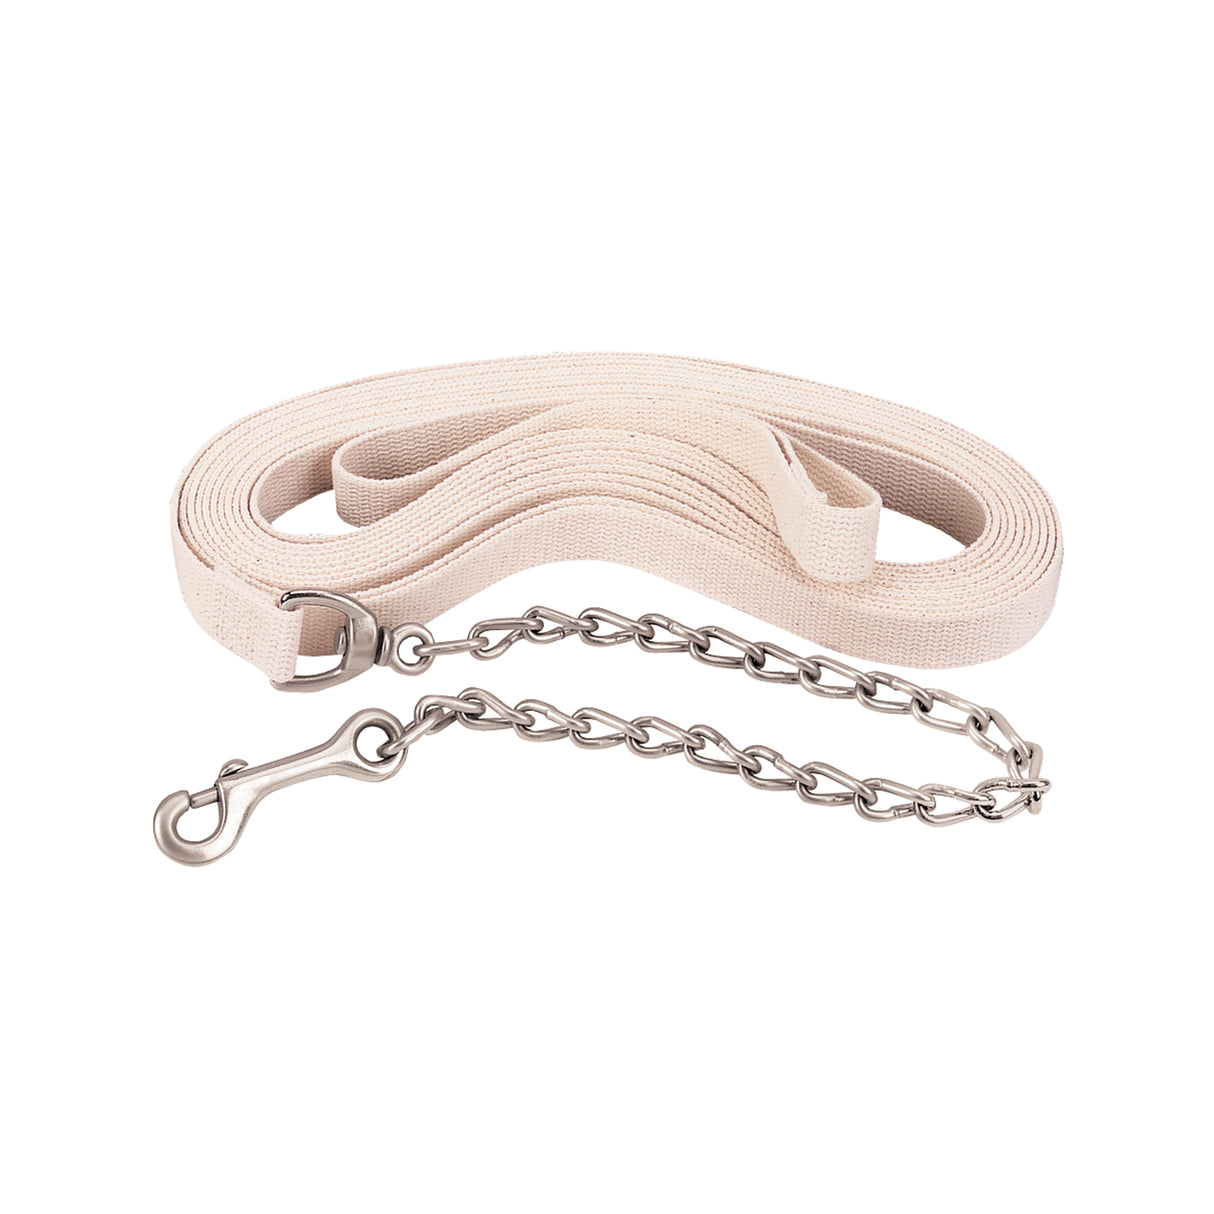 Flat Cotton Lunge Line, 1" x 27 with Chain